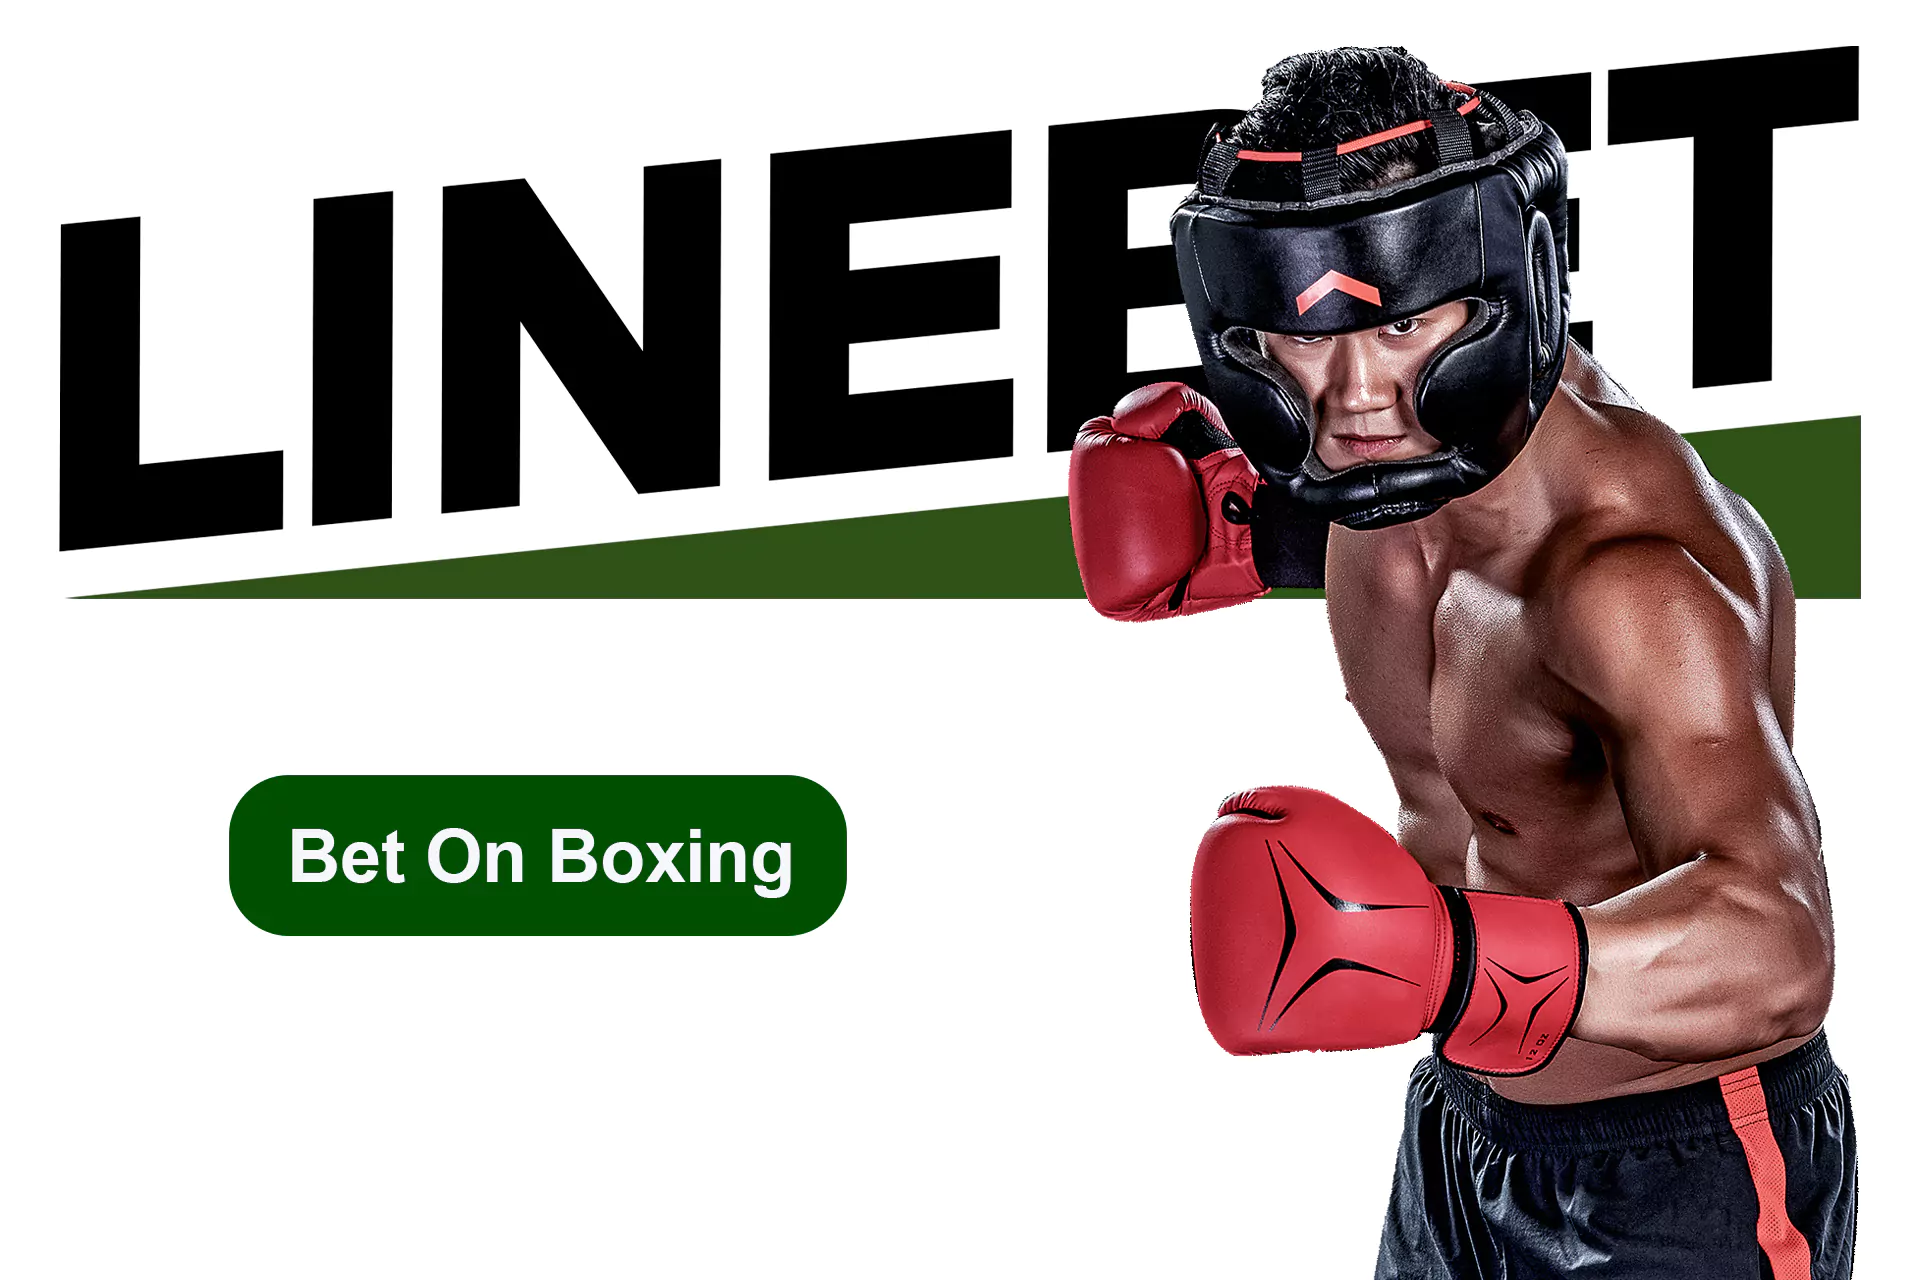 If you are a fan of boxing, you can place bets online.